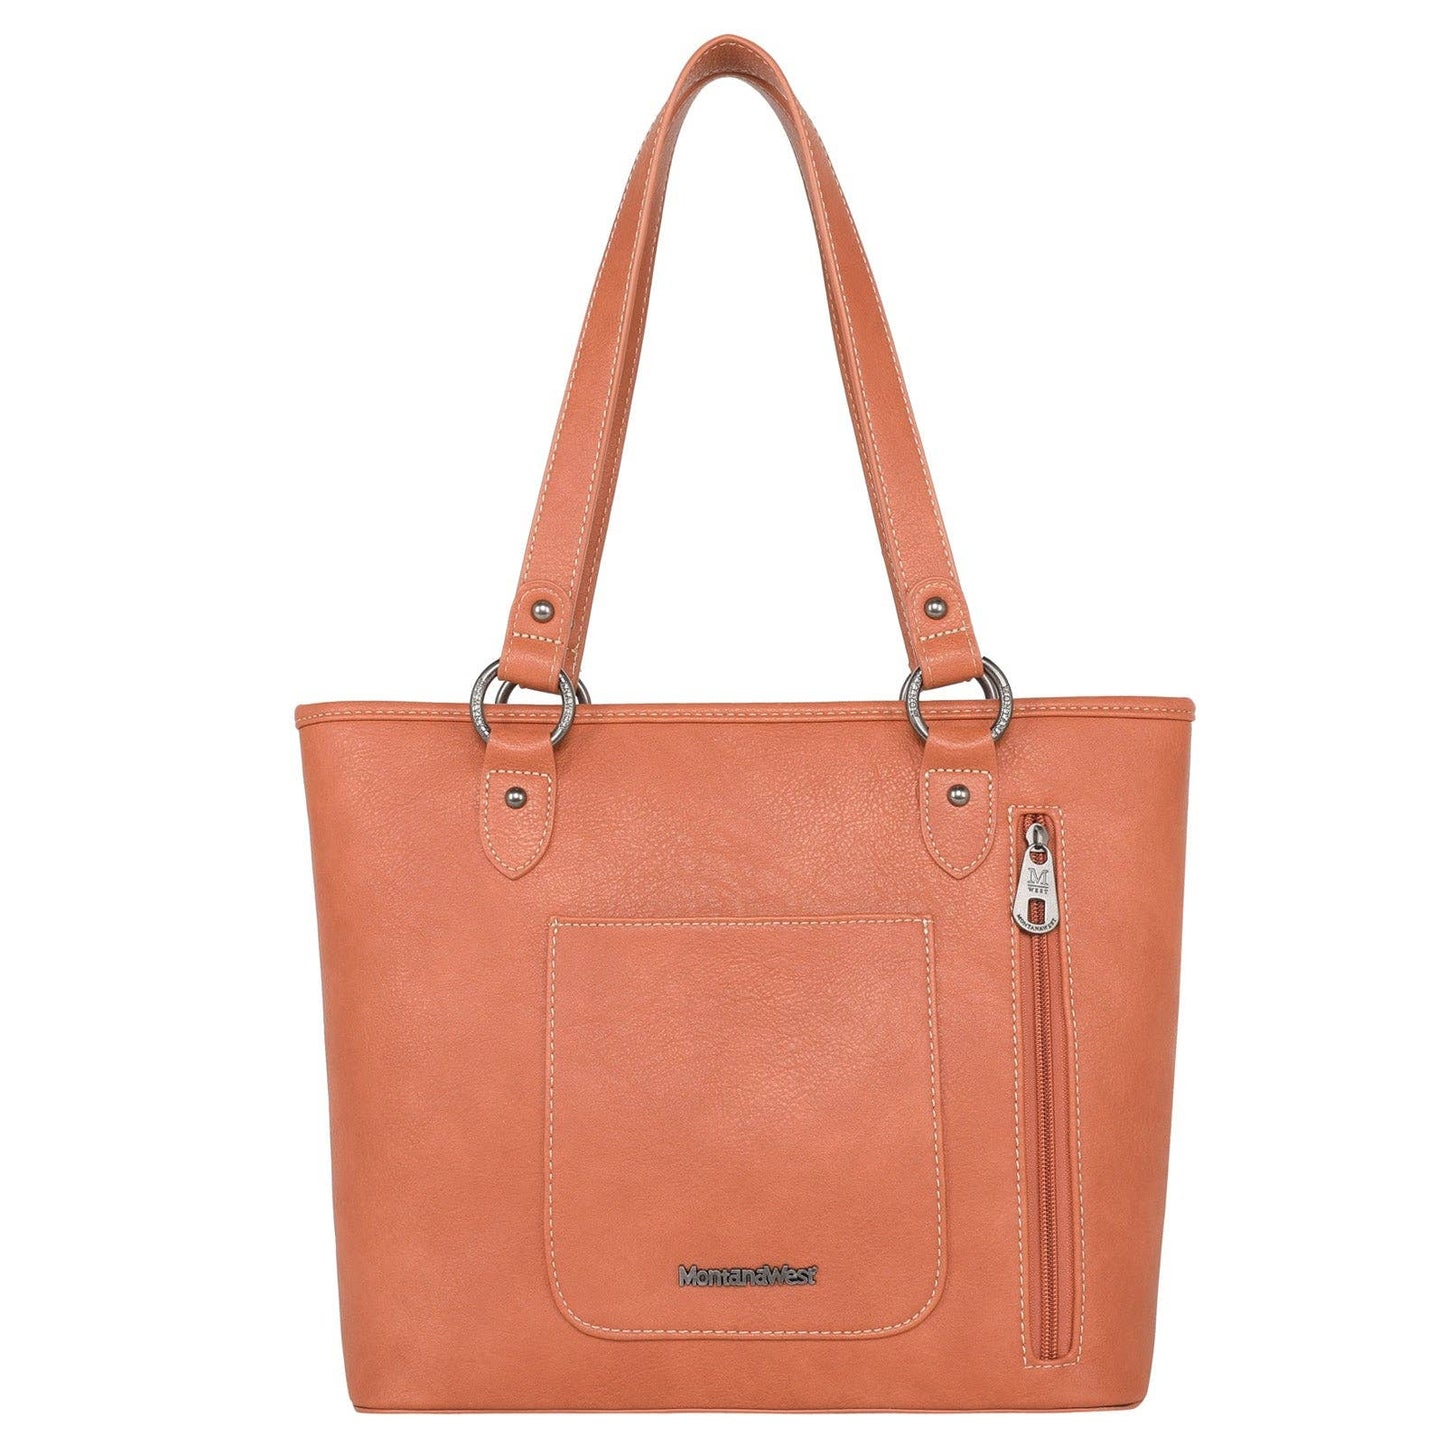 Montana West - MW1222G-8317 Montana West Cut-out Collection Tote: Tan